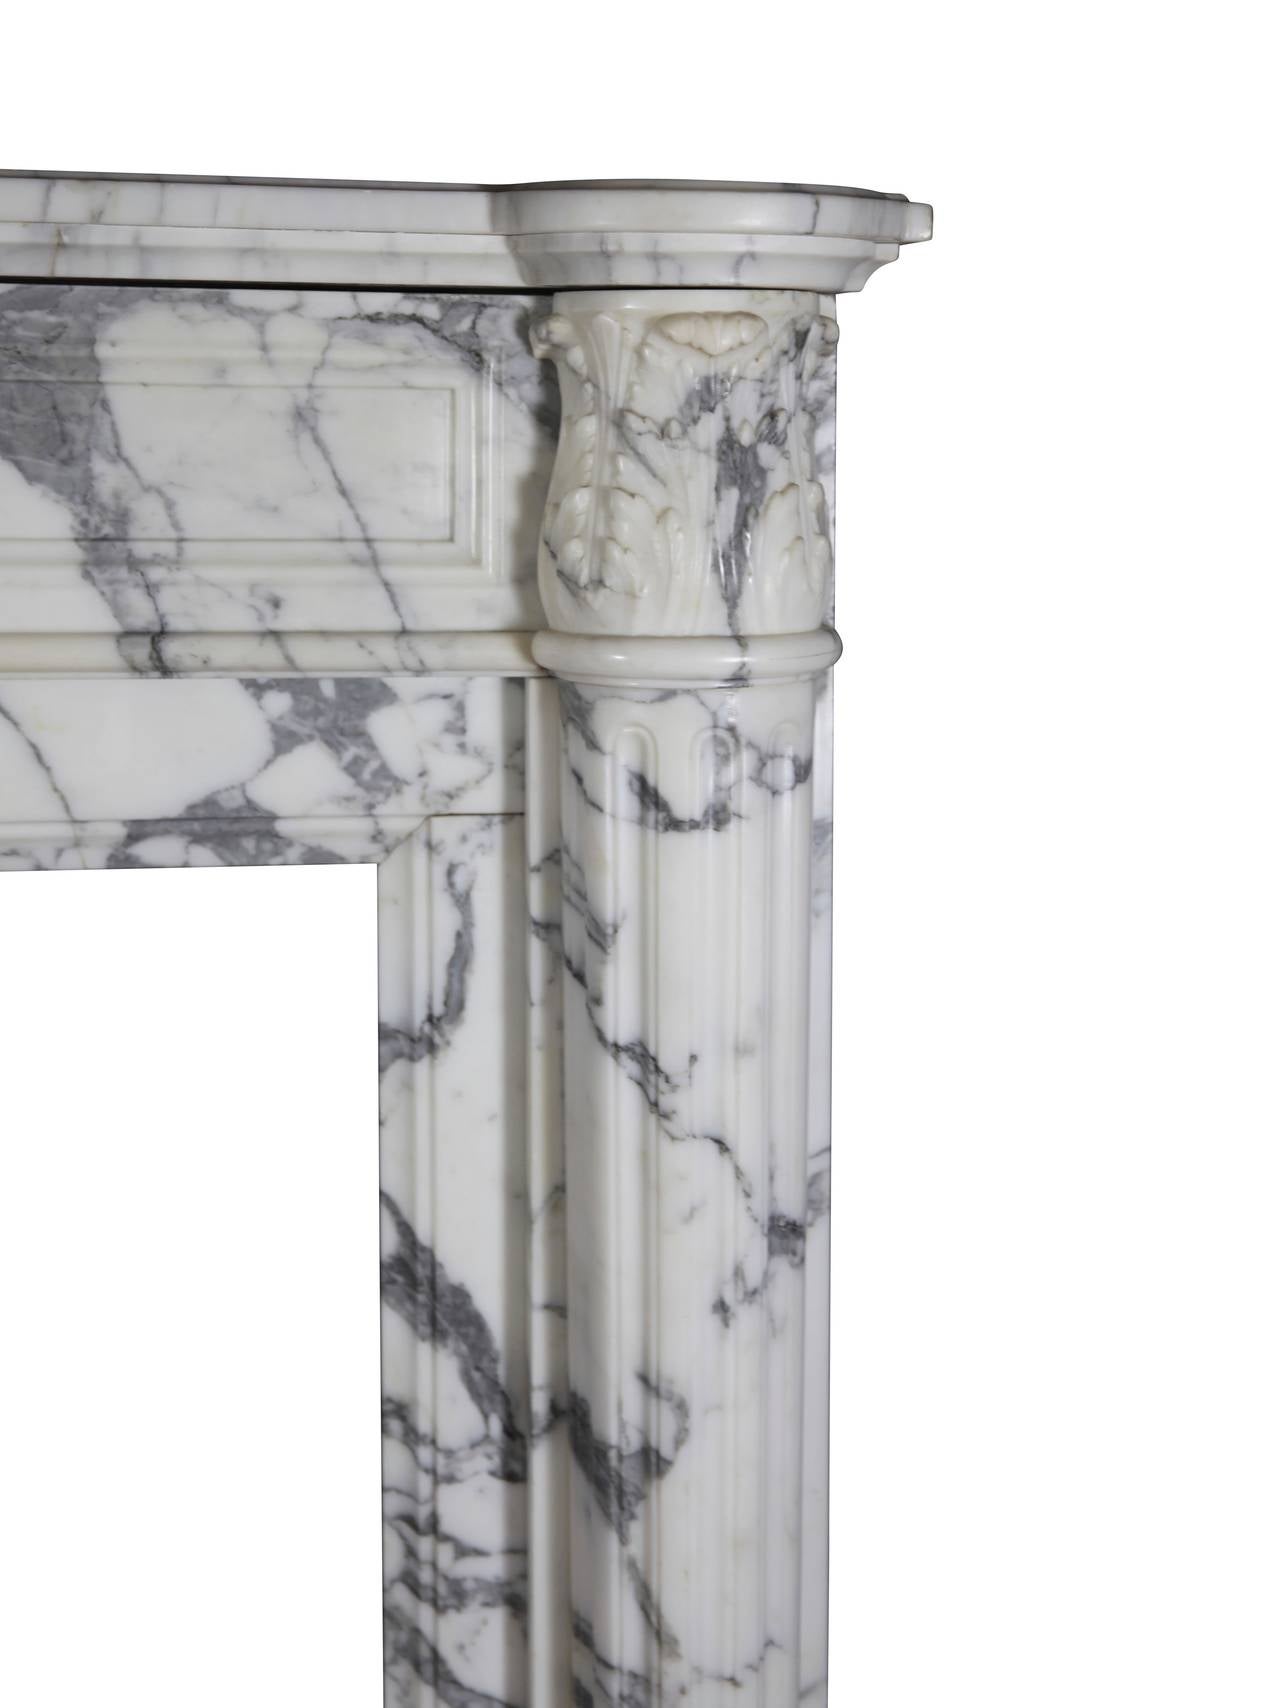 Louis XVI White Grand Interior Carrare Marble French Antique Fireplace Mantel